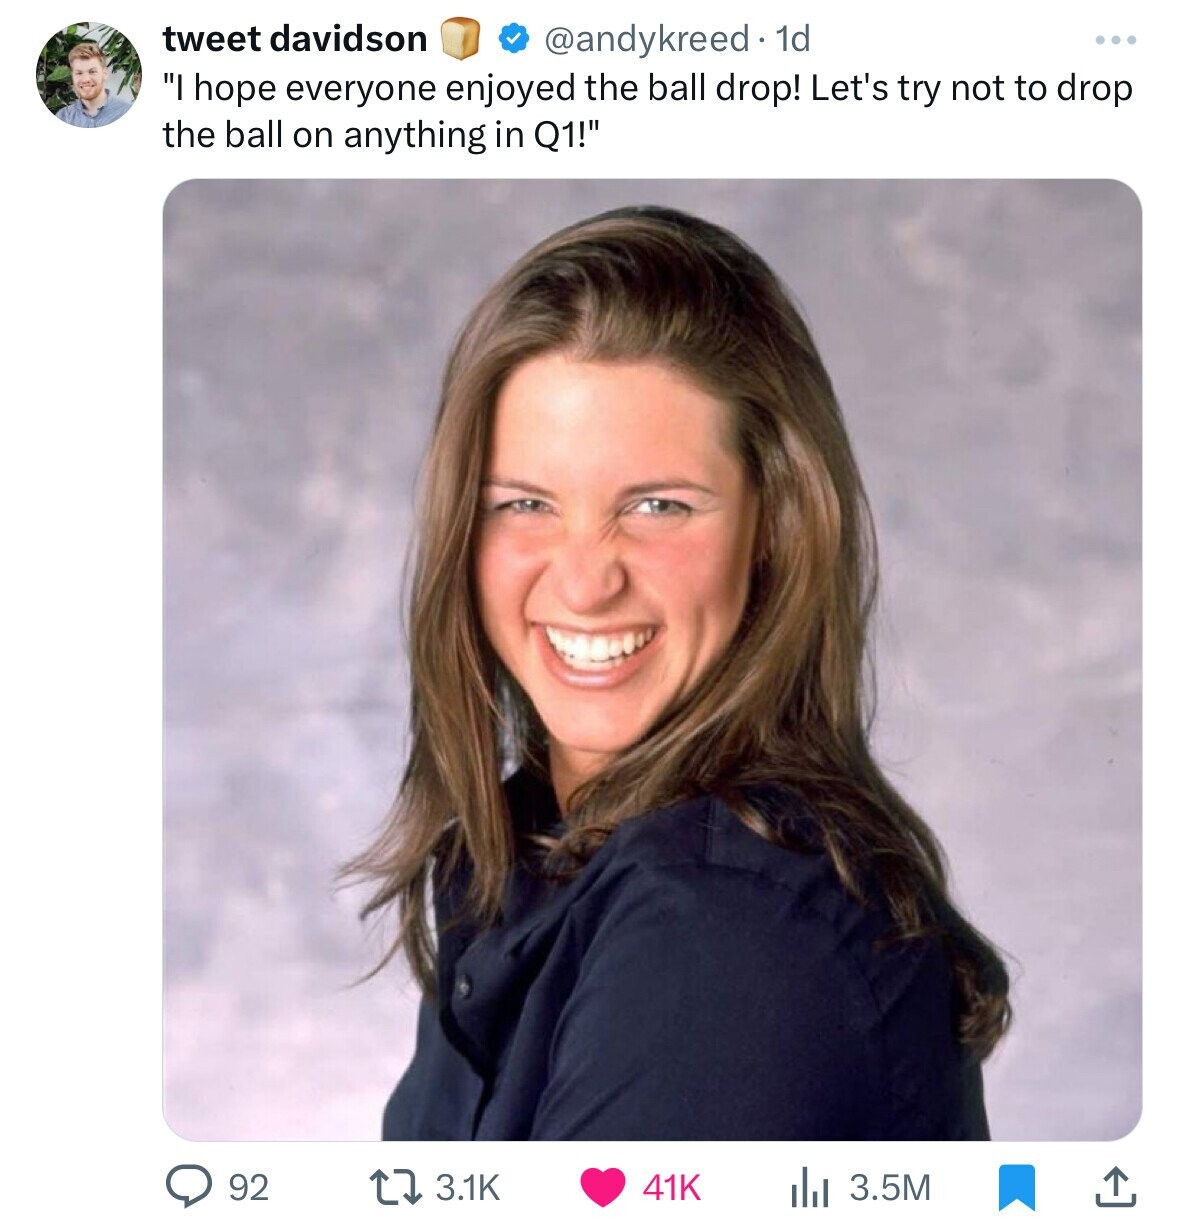 stephanie mcmahon smile meme - tweet davidson 1d "I hope everyone enjoyed the ball drop! Let's try not to drop the ball on anything in Q1!" 92 41K 3.5M ...